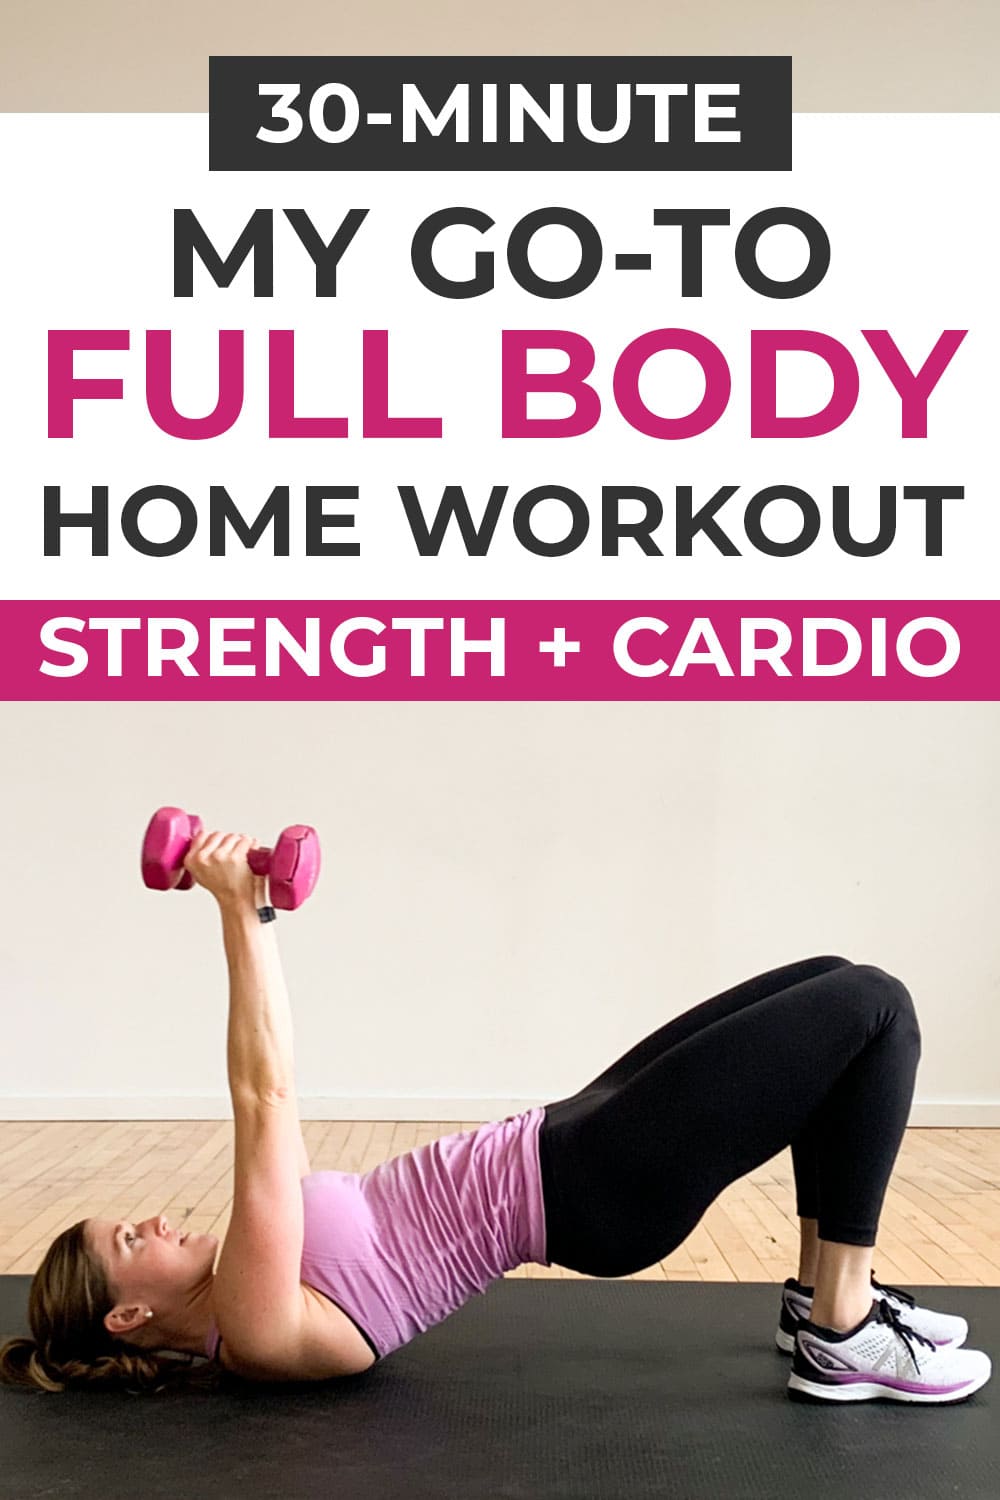 15 Minute Hiit workout dvd for Women